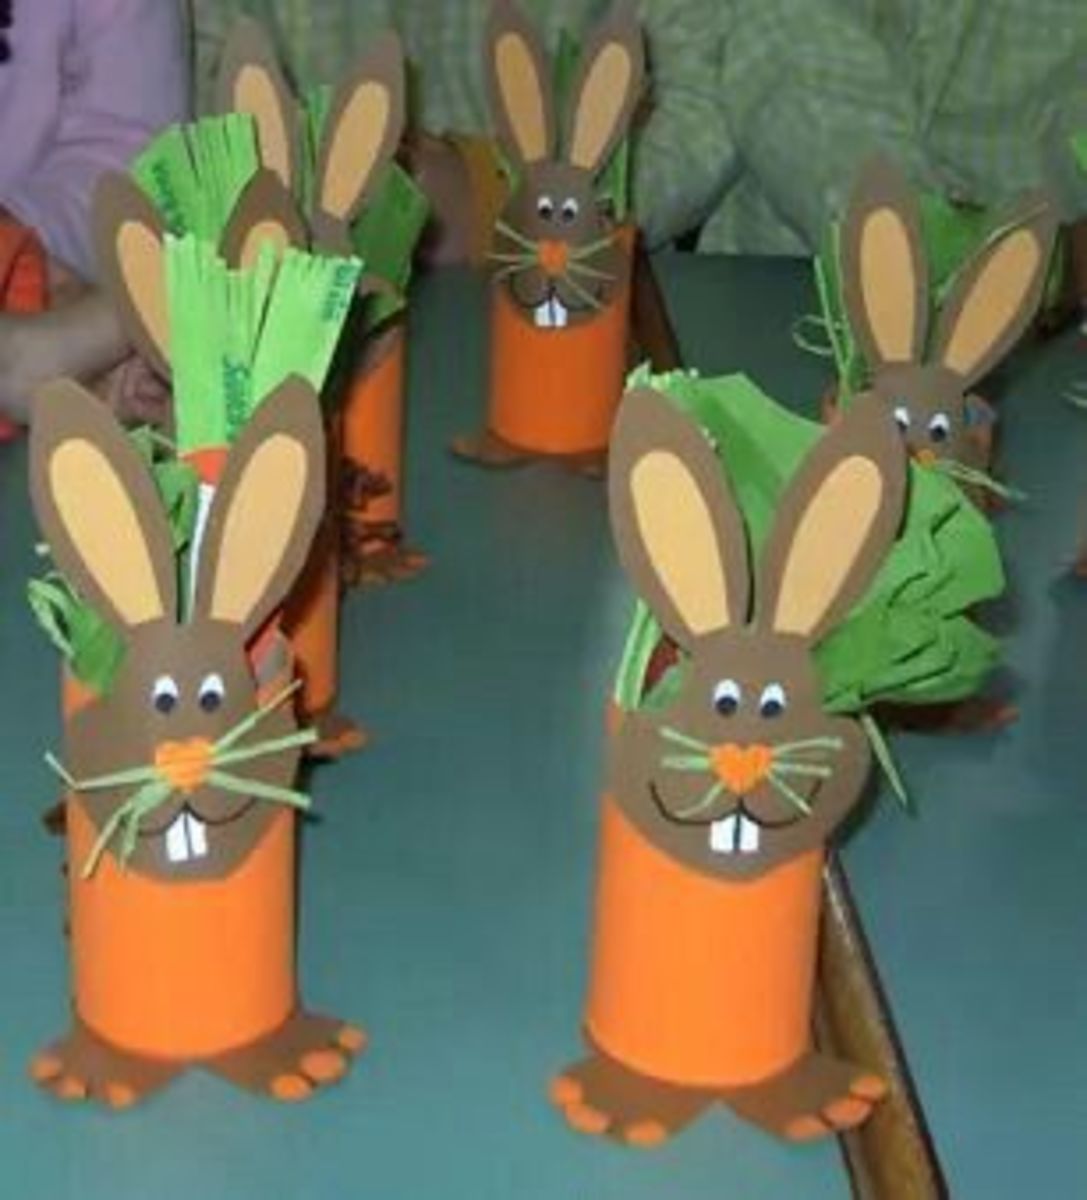 Rabbits in Carrot Tubes